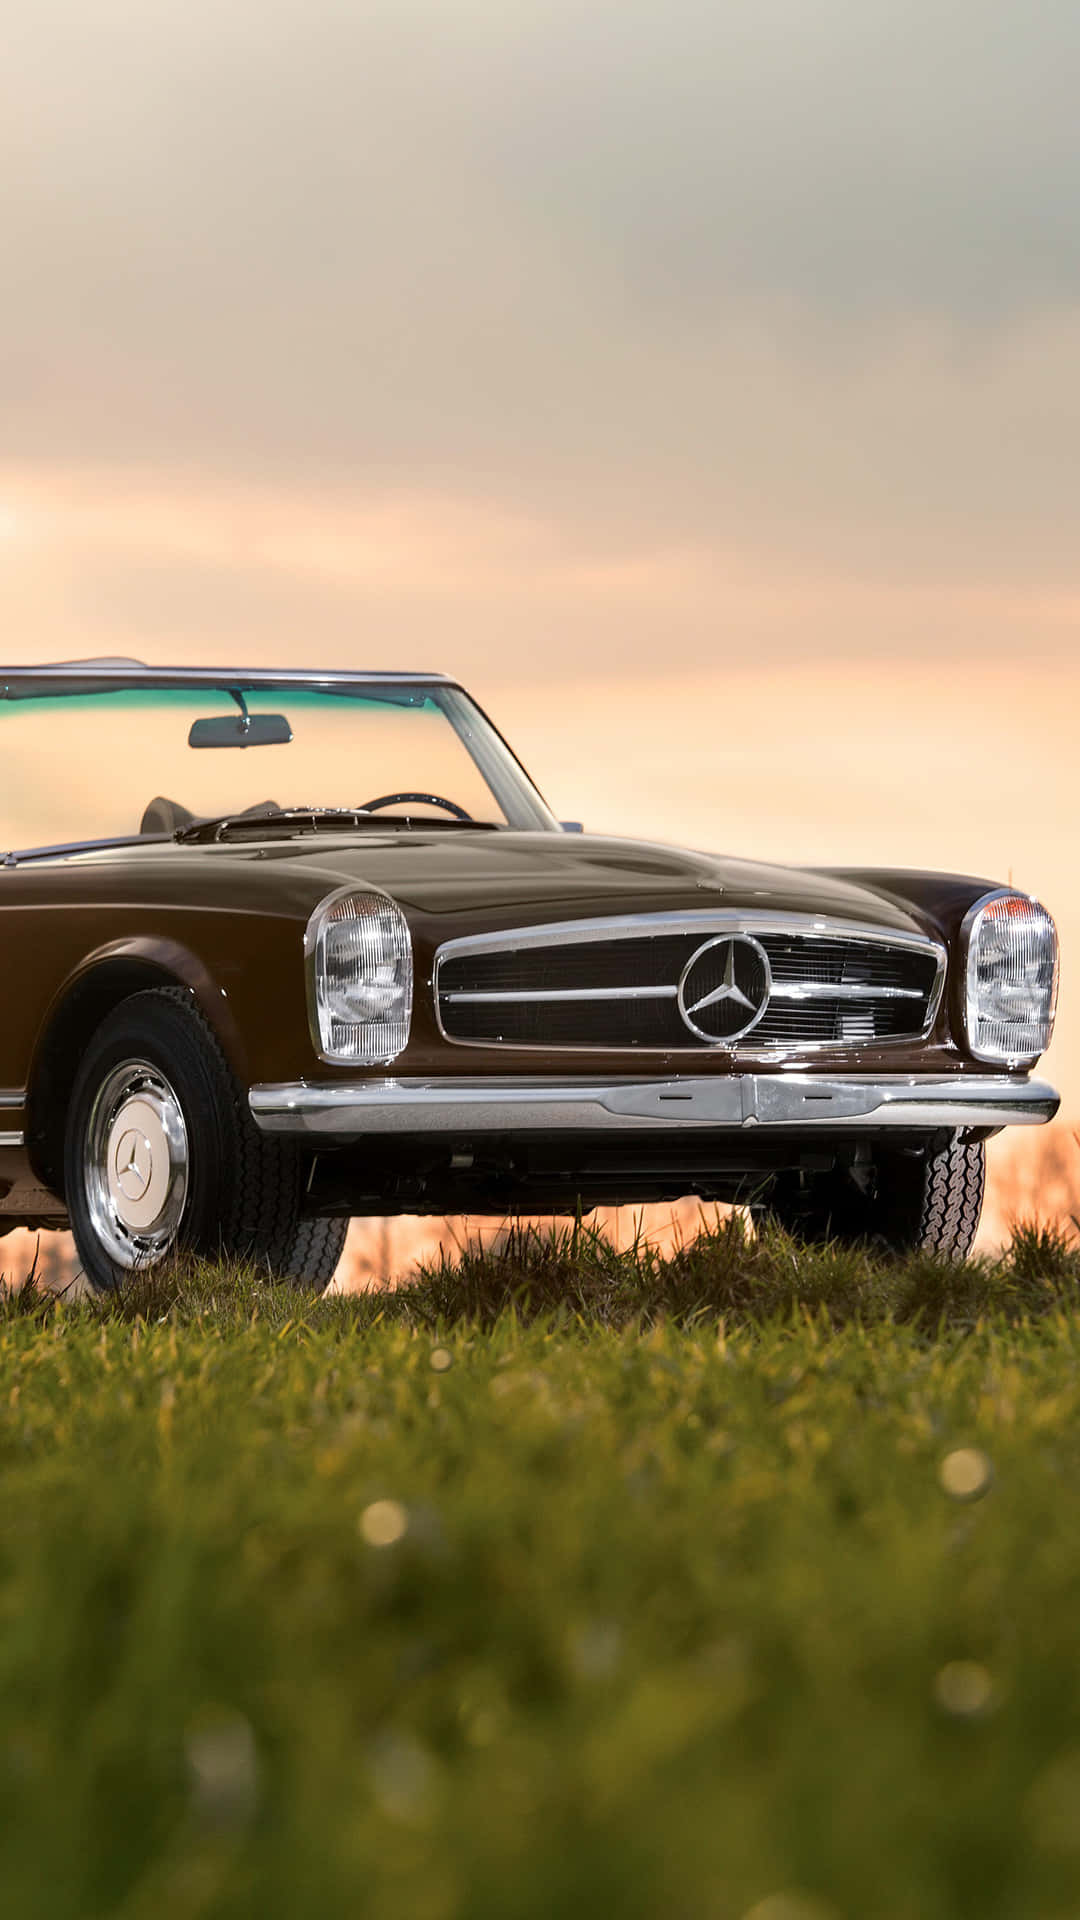 Get Ready to Cruise in Style with this Vintage Car iPhone Wallpaper